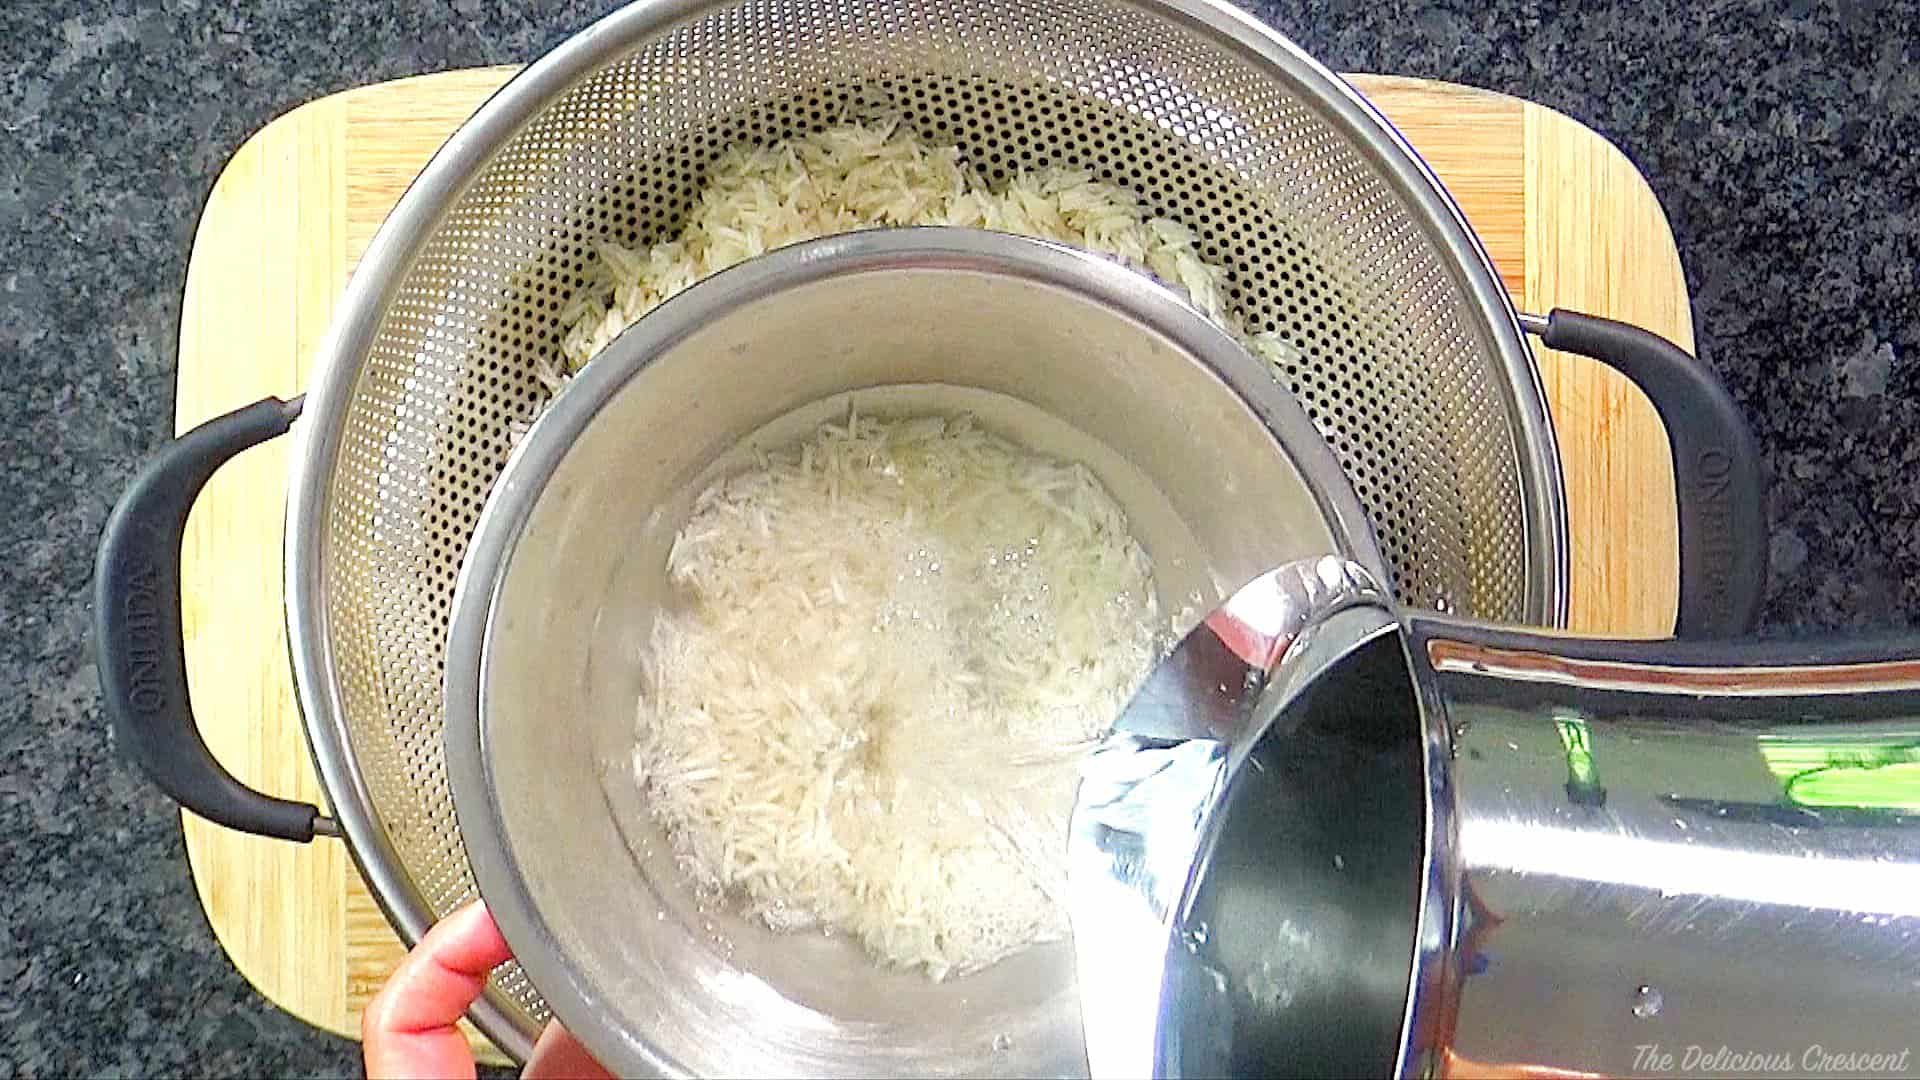 Some rice soaked in water.